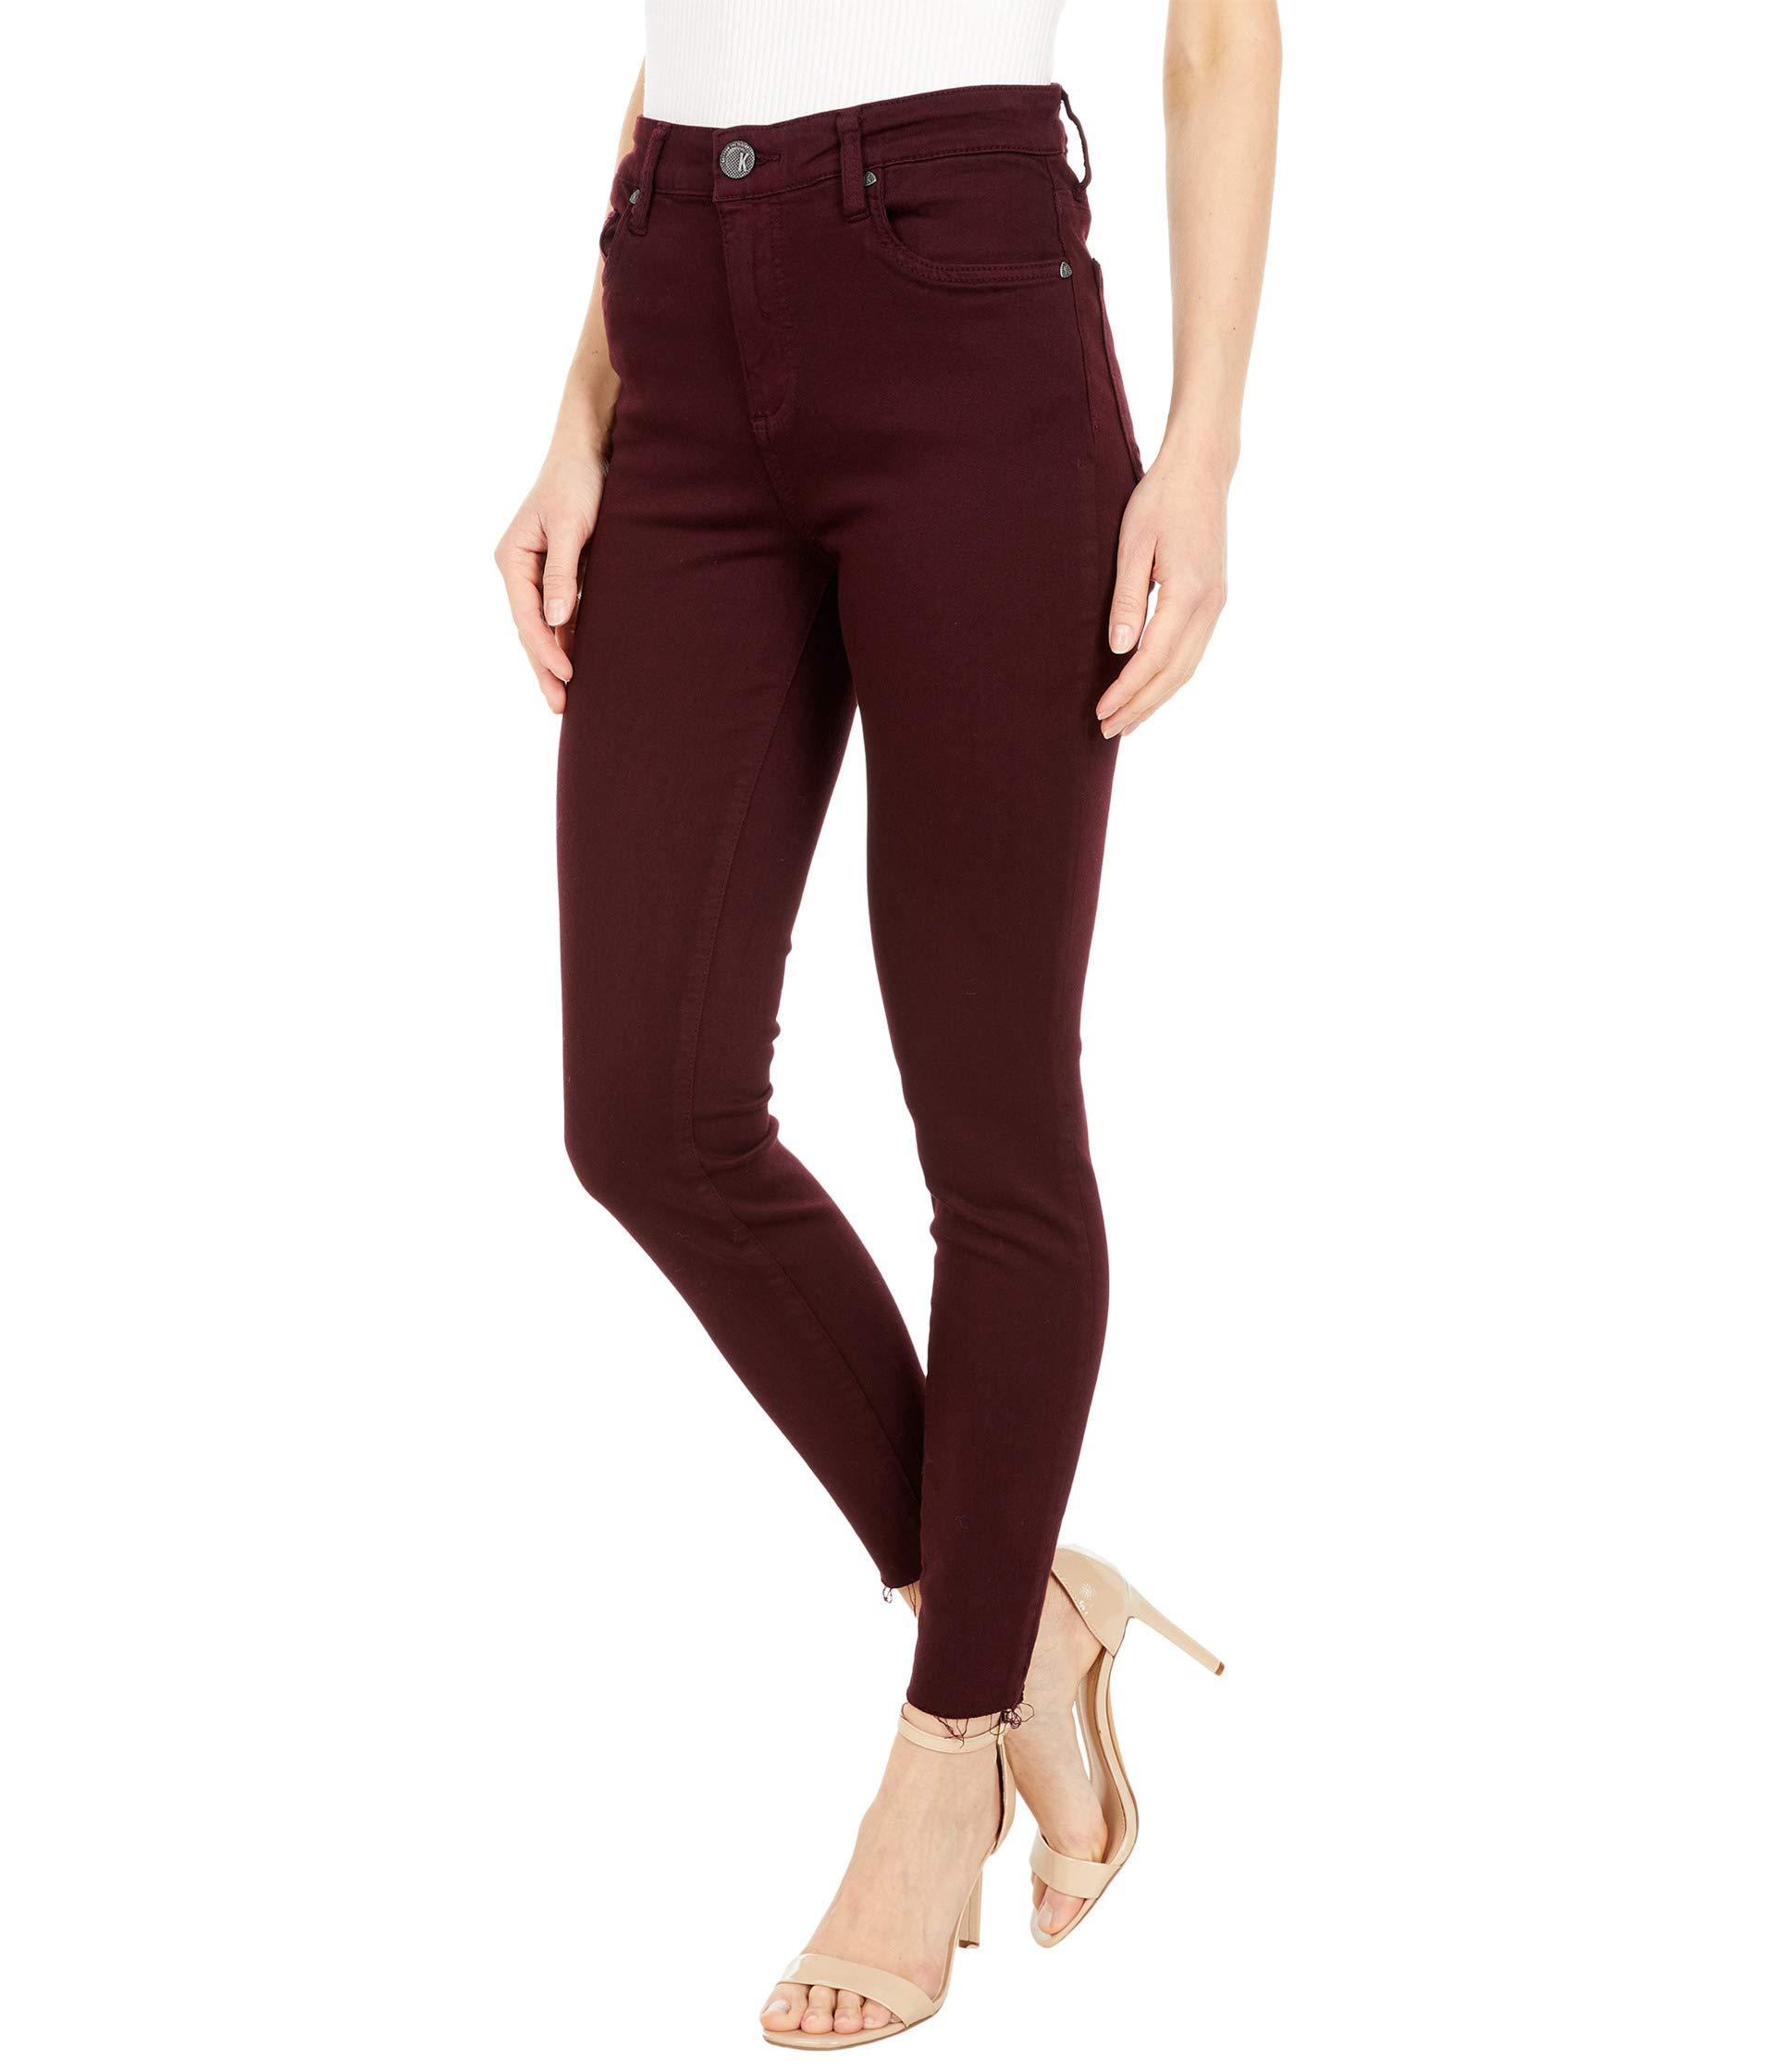 KUT from the Kloth Womens Donna Ankle Skinny Jeans in Deep Plum 